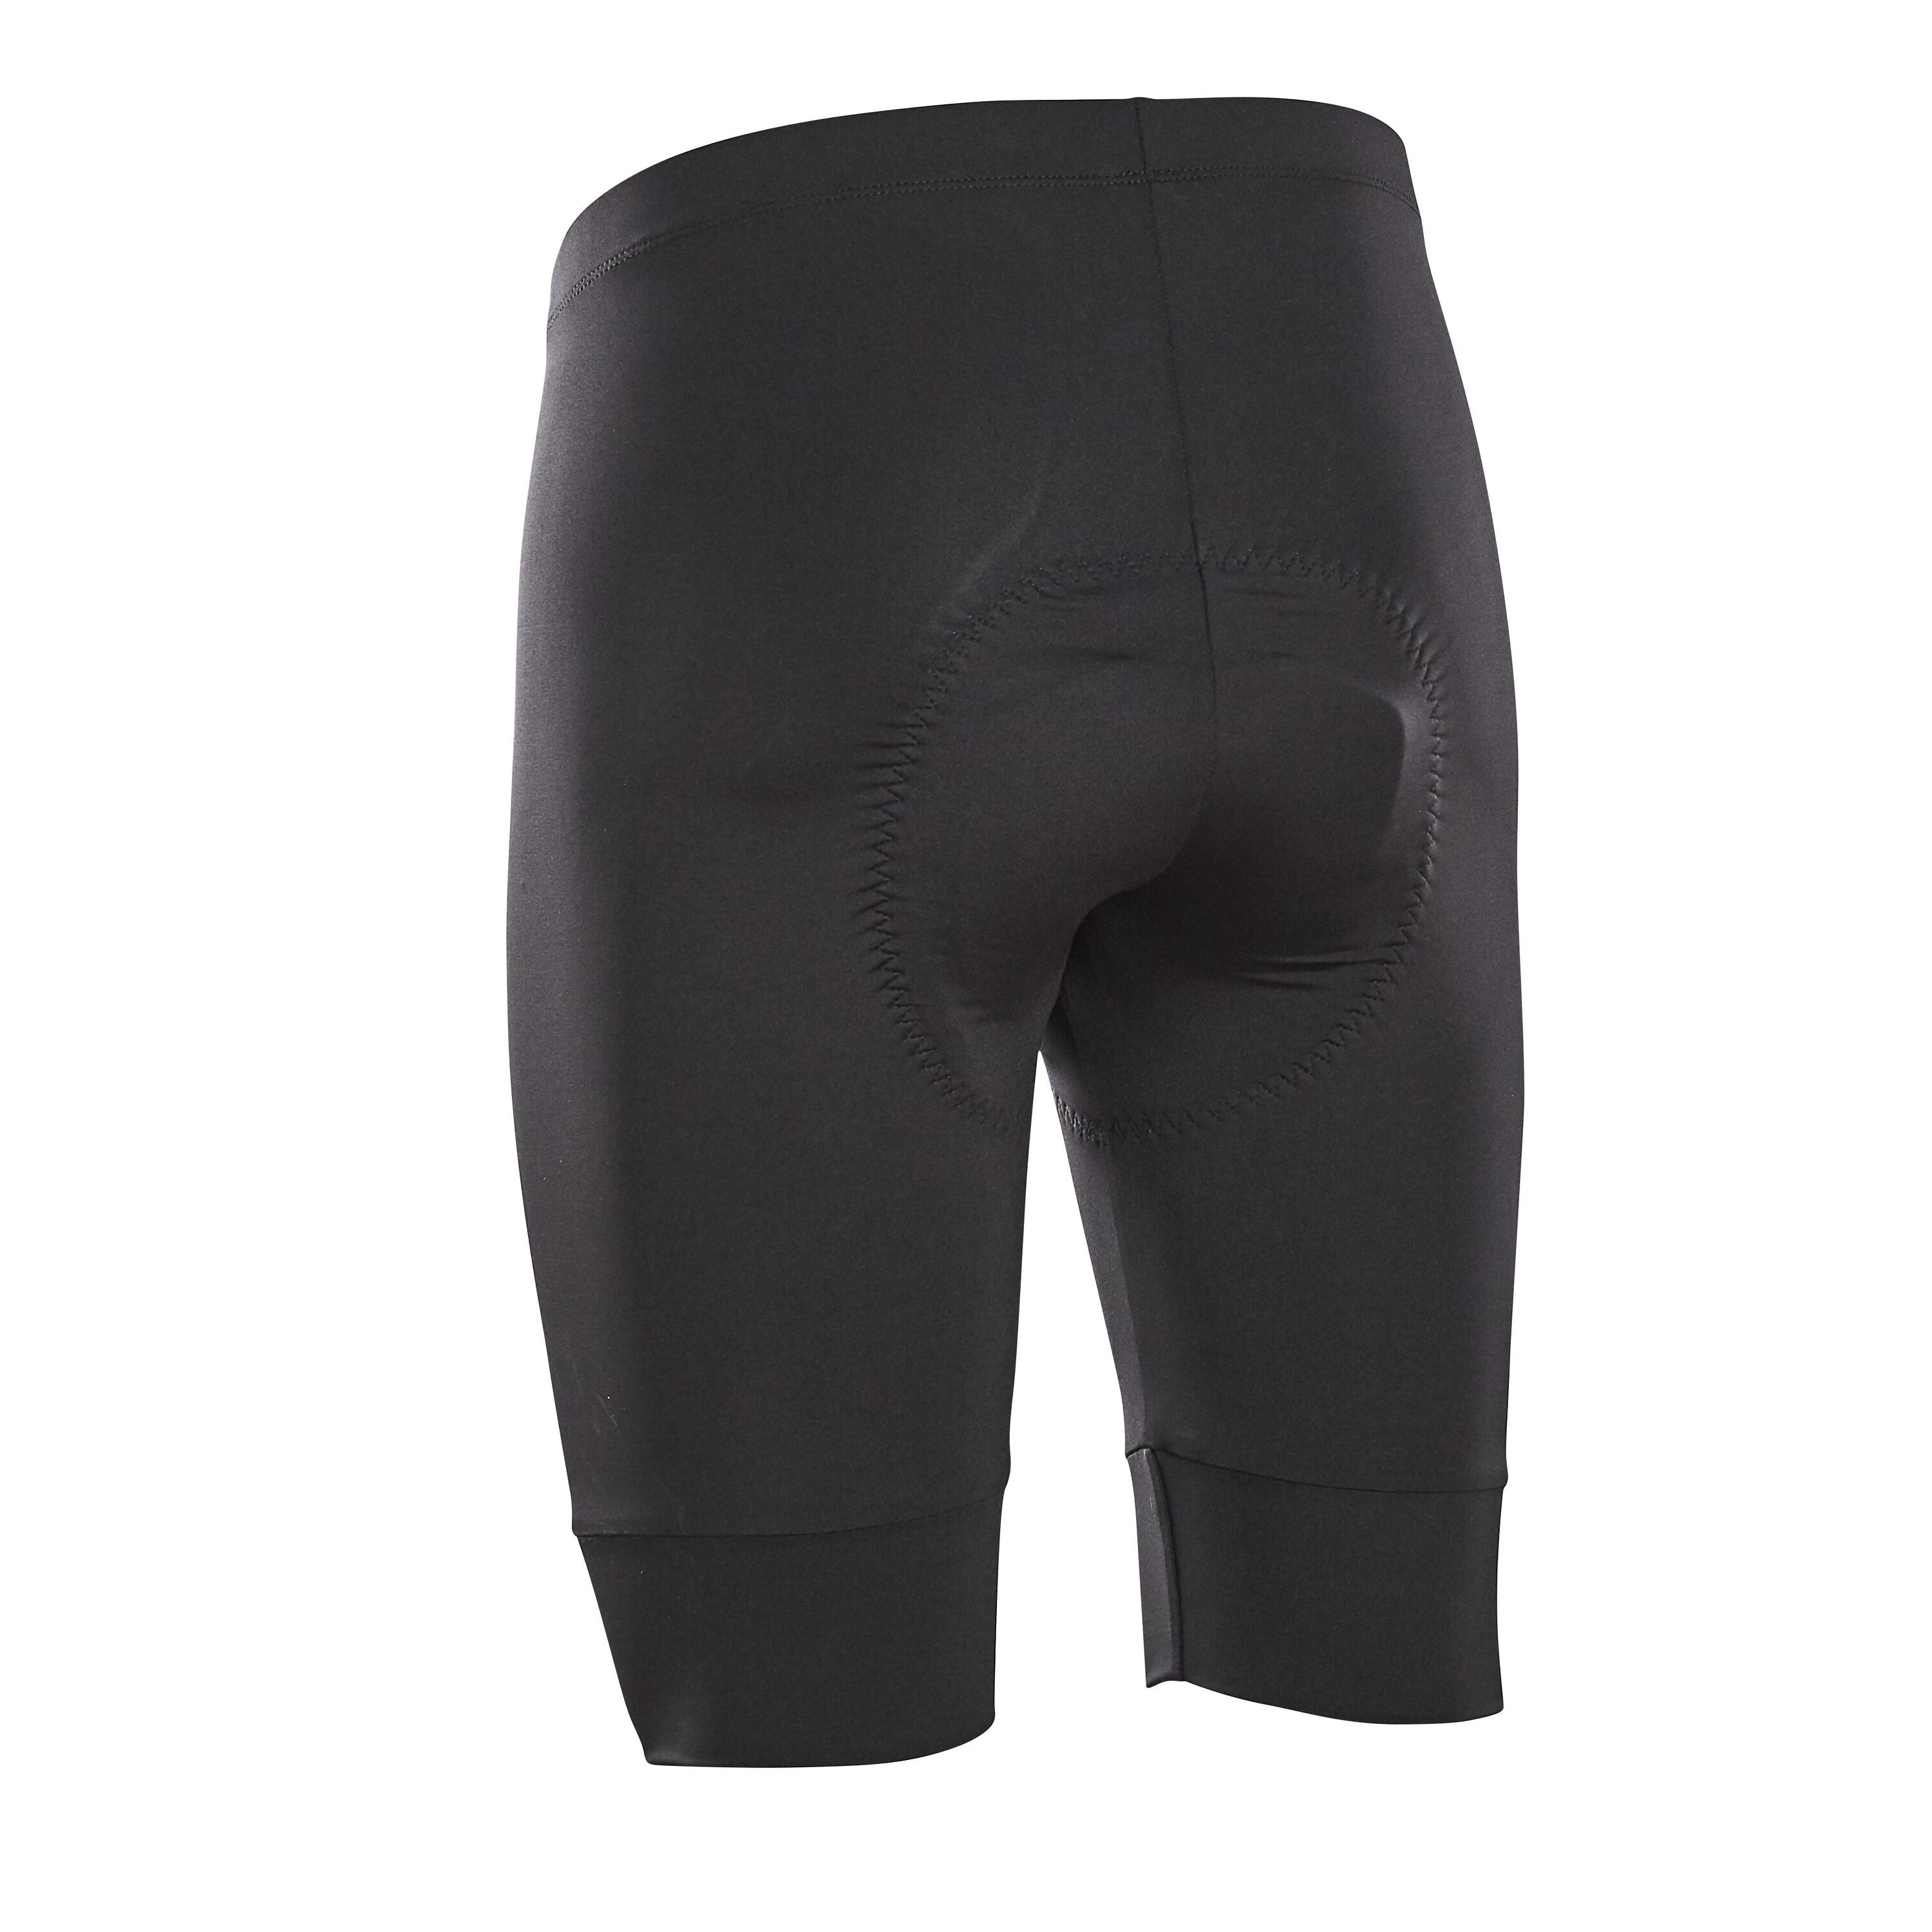 Essential Men's Road Cycling Bibless Shorts 2/9